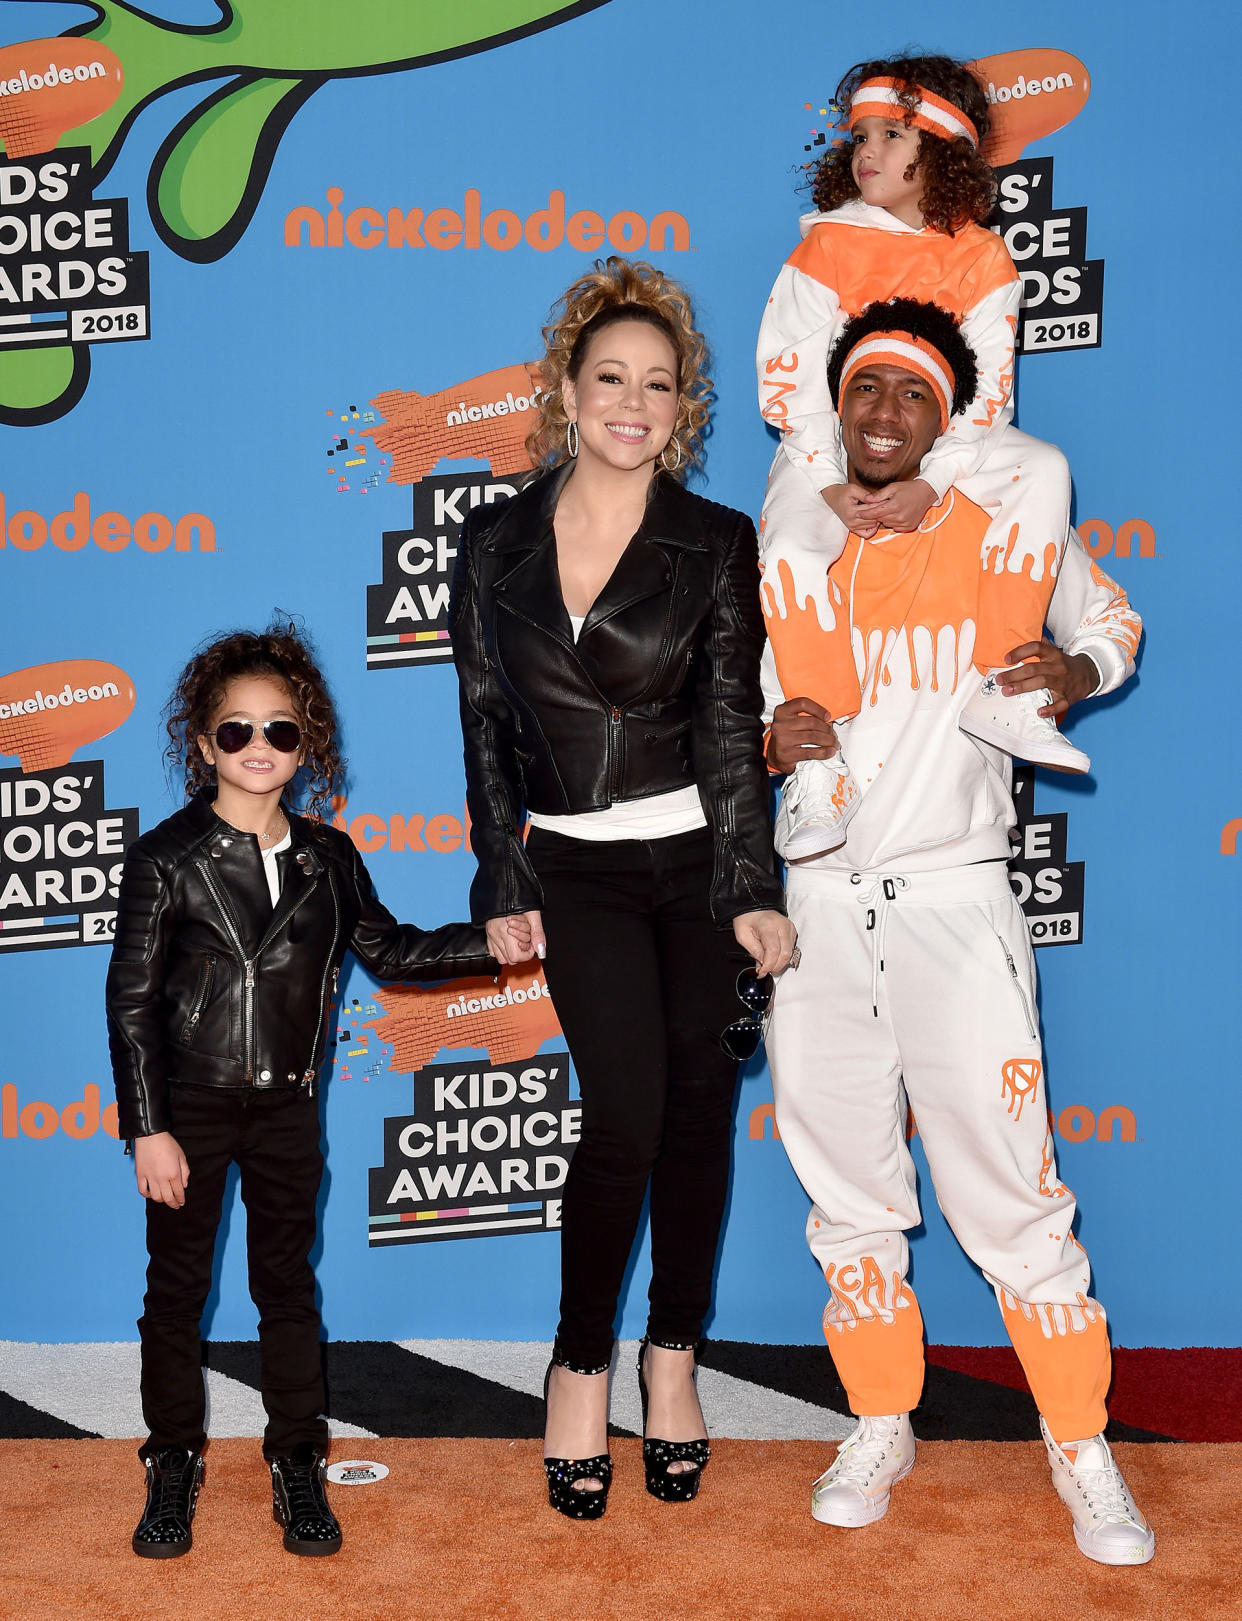 Mariah Carey, Nick Cannon, daughter Monroe Cannon and son Moroccan Cannon attend Nickelodeon's 2018 Kids' Choice Awards at The Forum on March 24, 2018 in Inglewood, California.  (Axelle / Bauer-Griffin / FilmMagic)